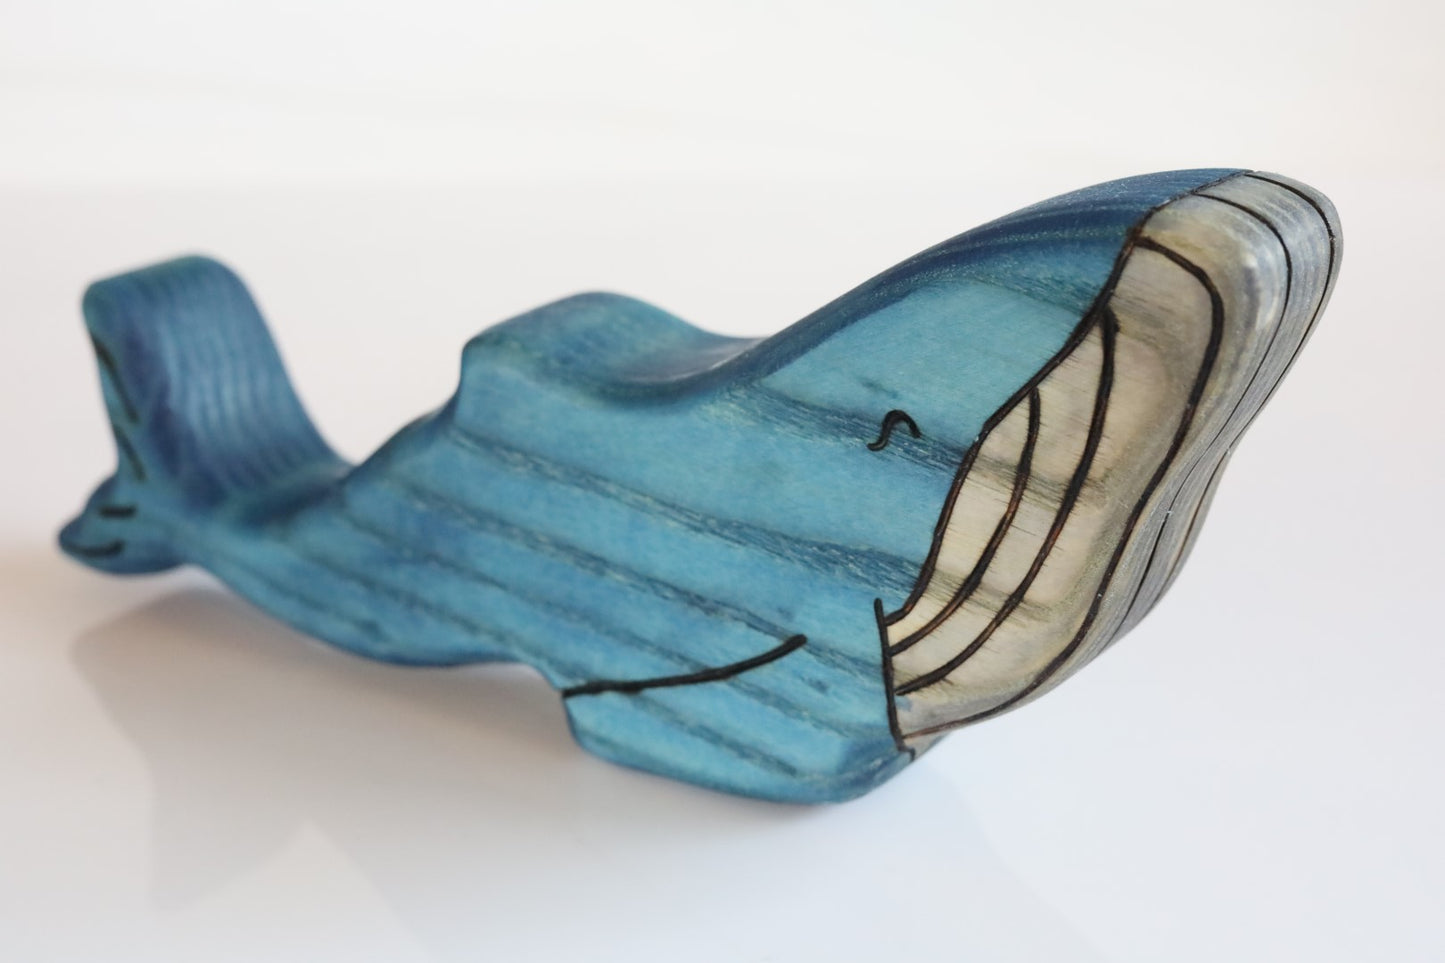 Wooden Humpback Whale Toy